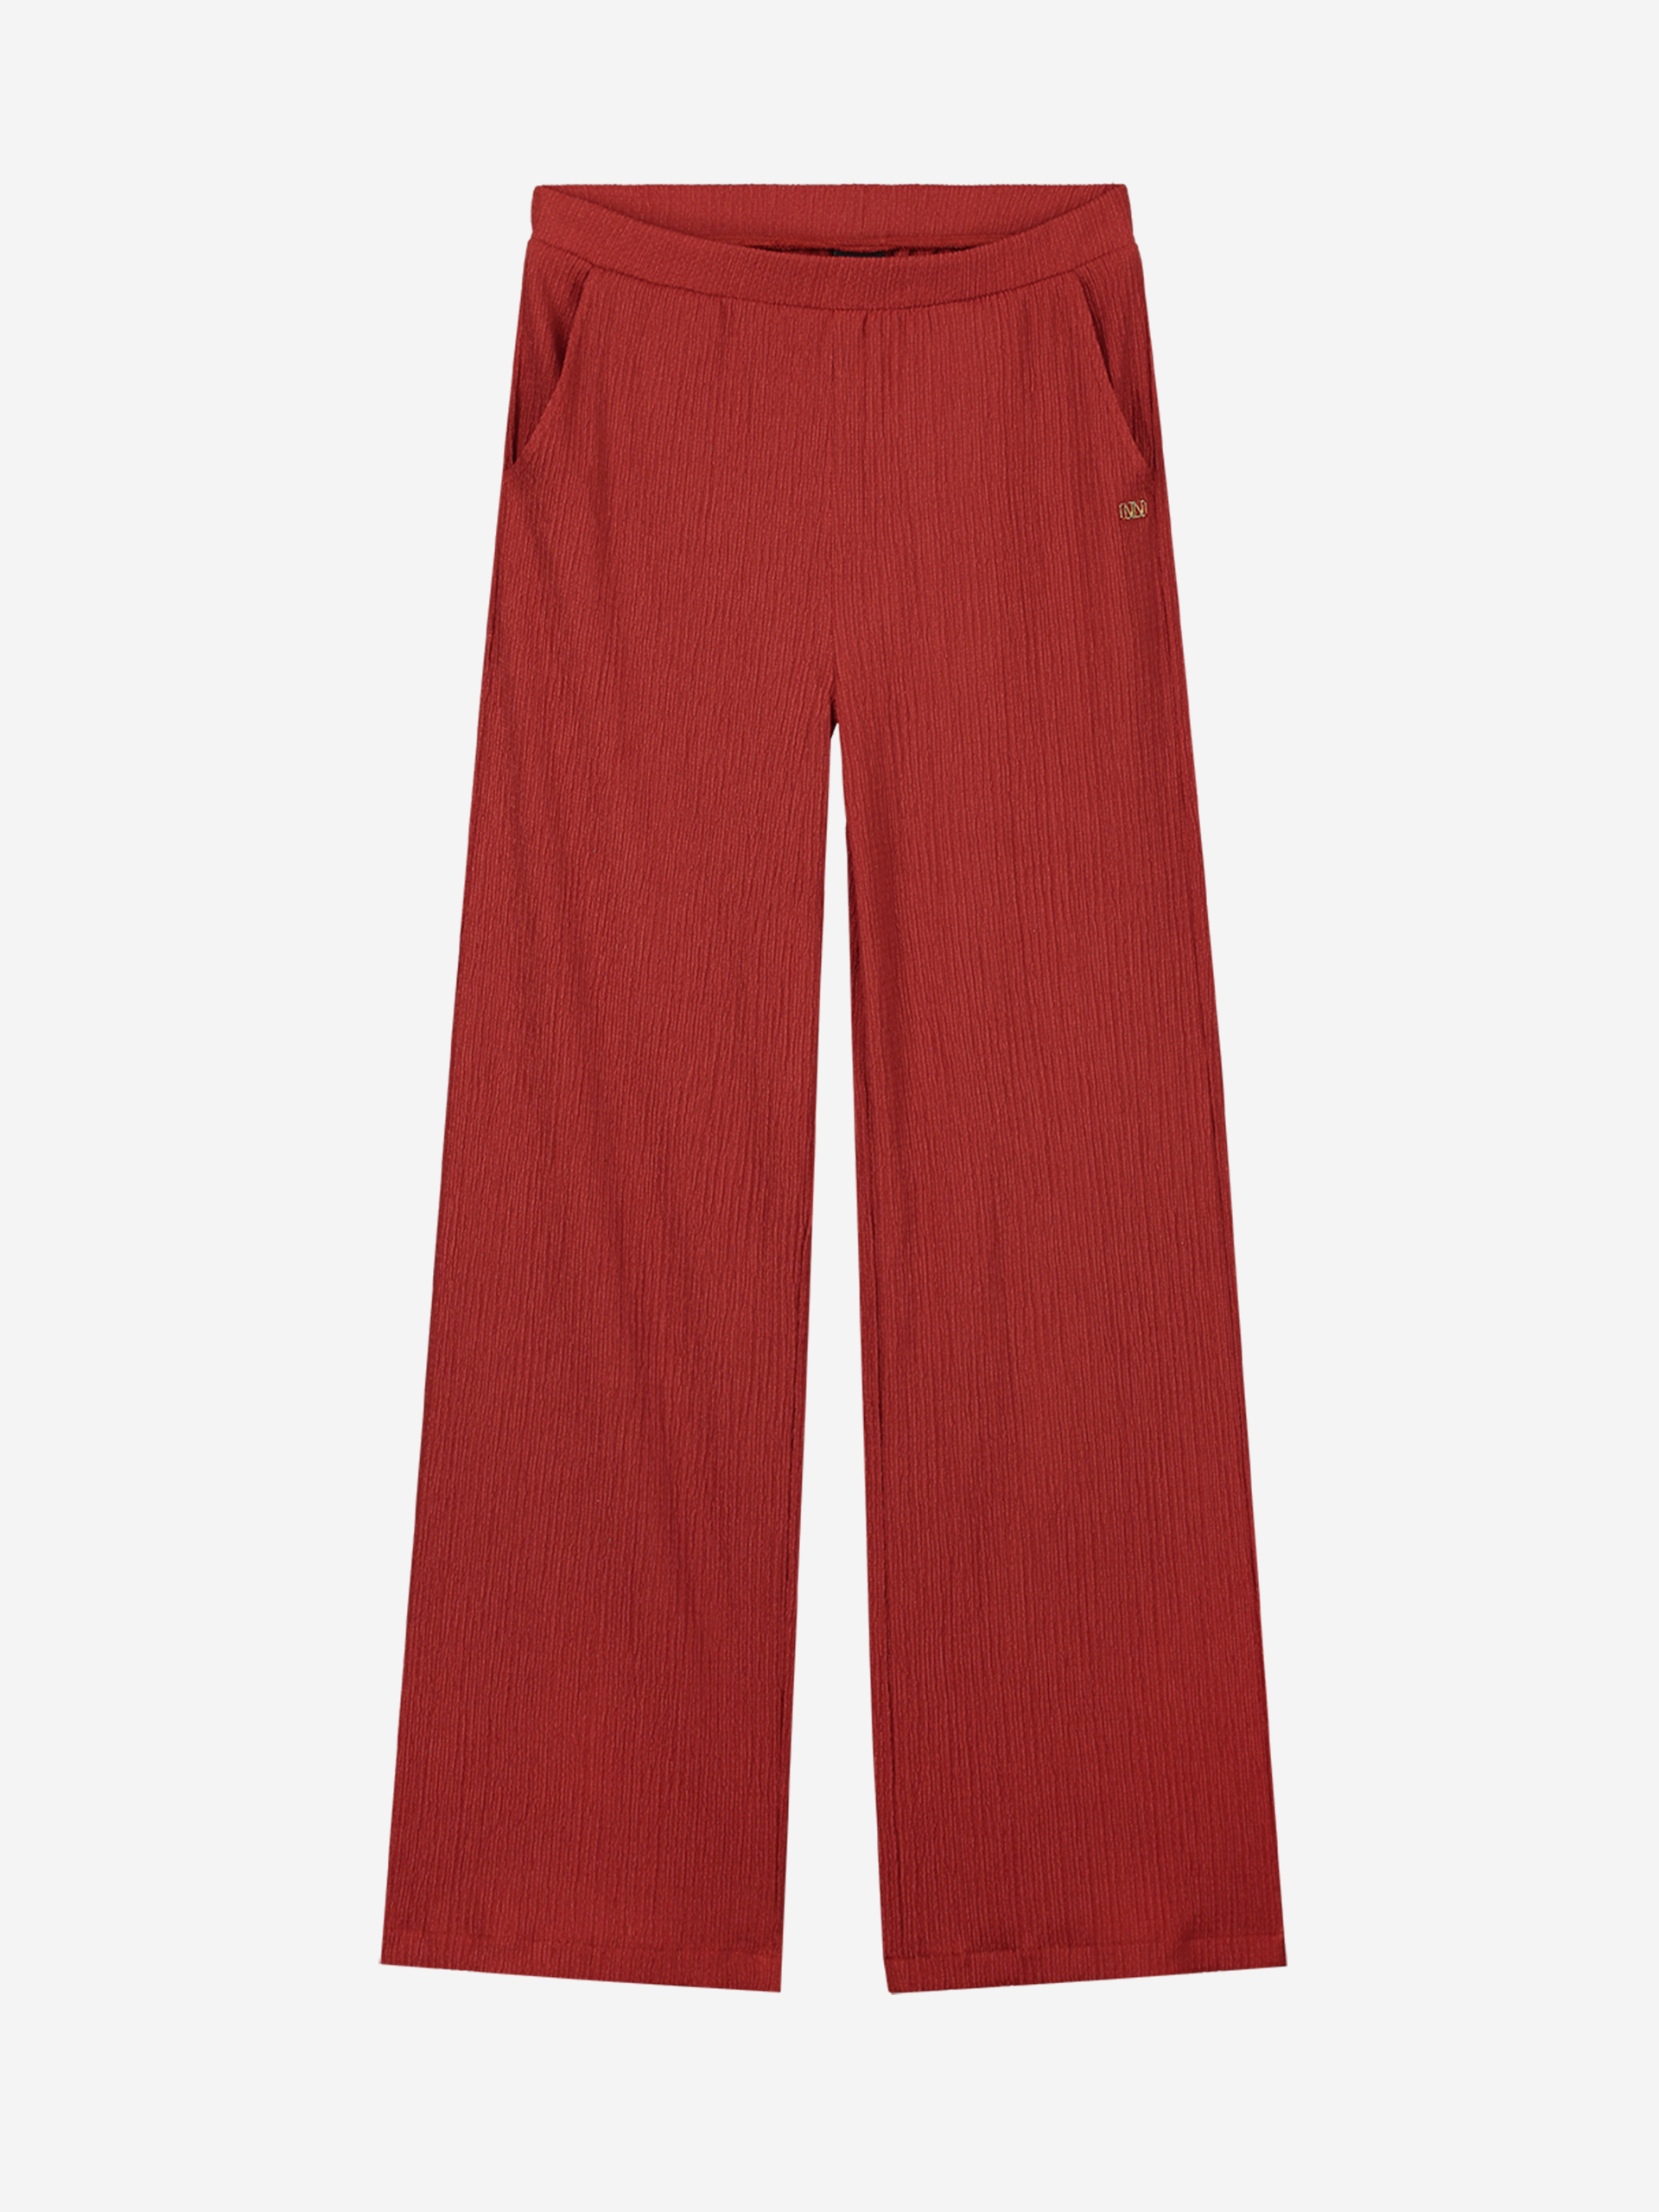 Regular pants with mid rise 